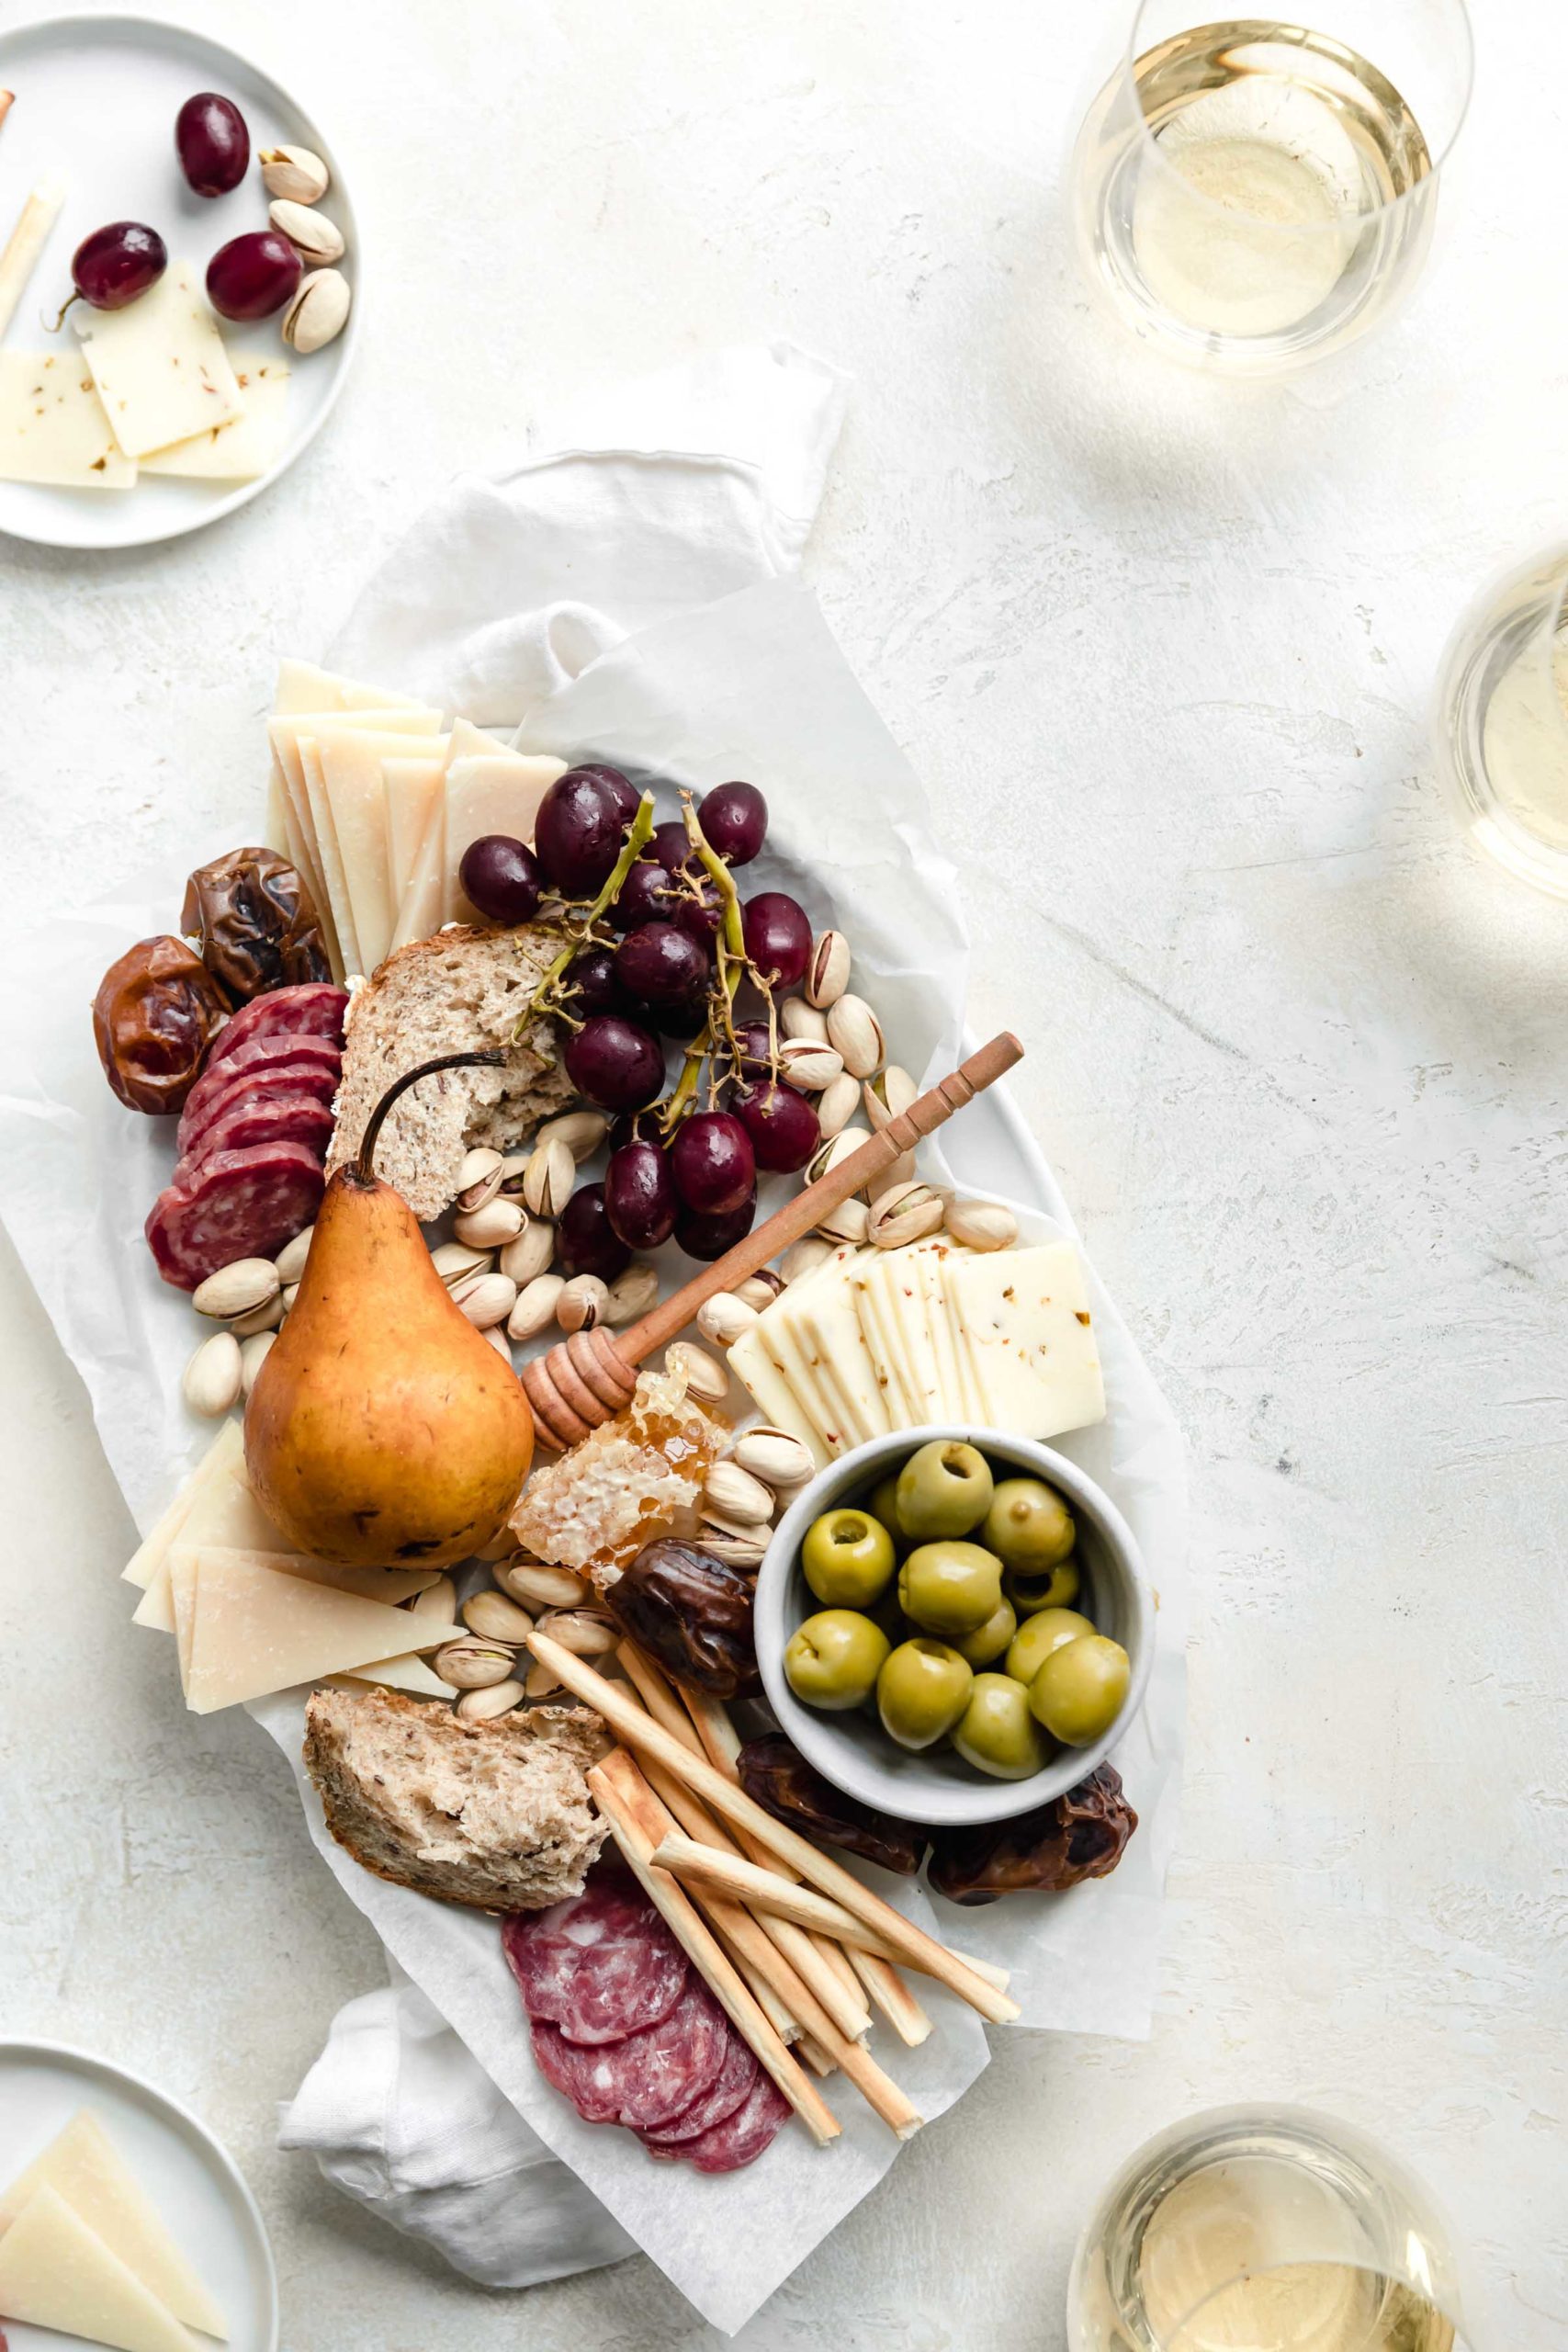 There is only one thing better than cheese, and that is cheese shared with friends! Whip up this easy holiday cheeseboard for your Friendsgiving or holiday party!